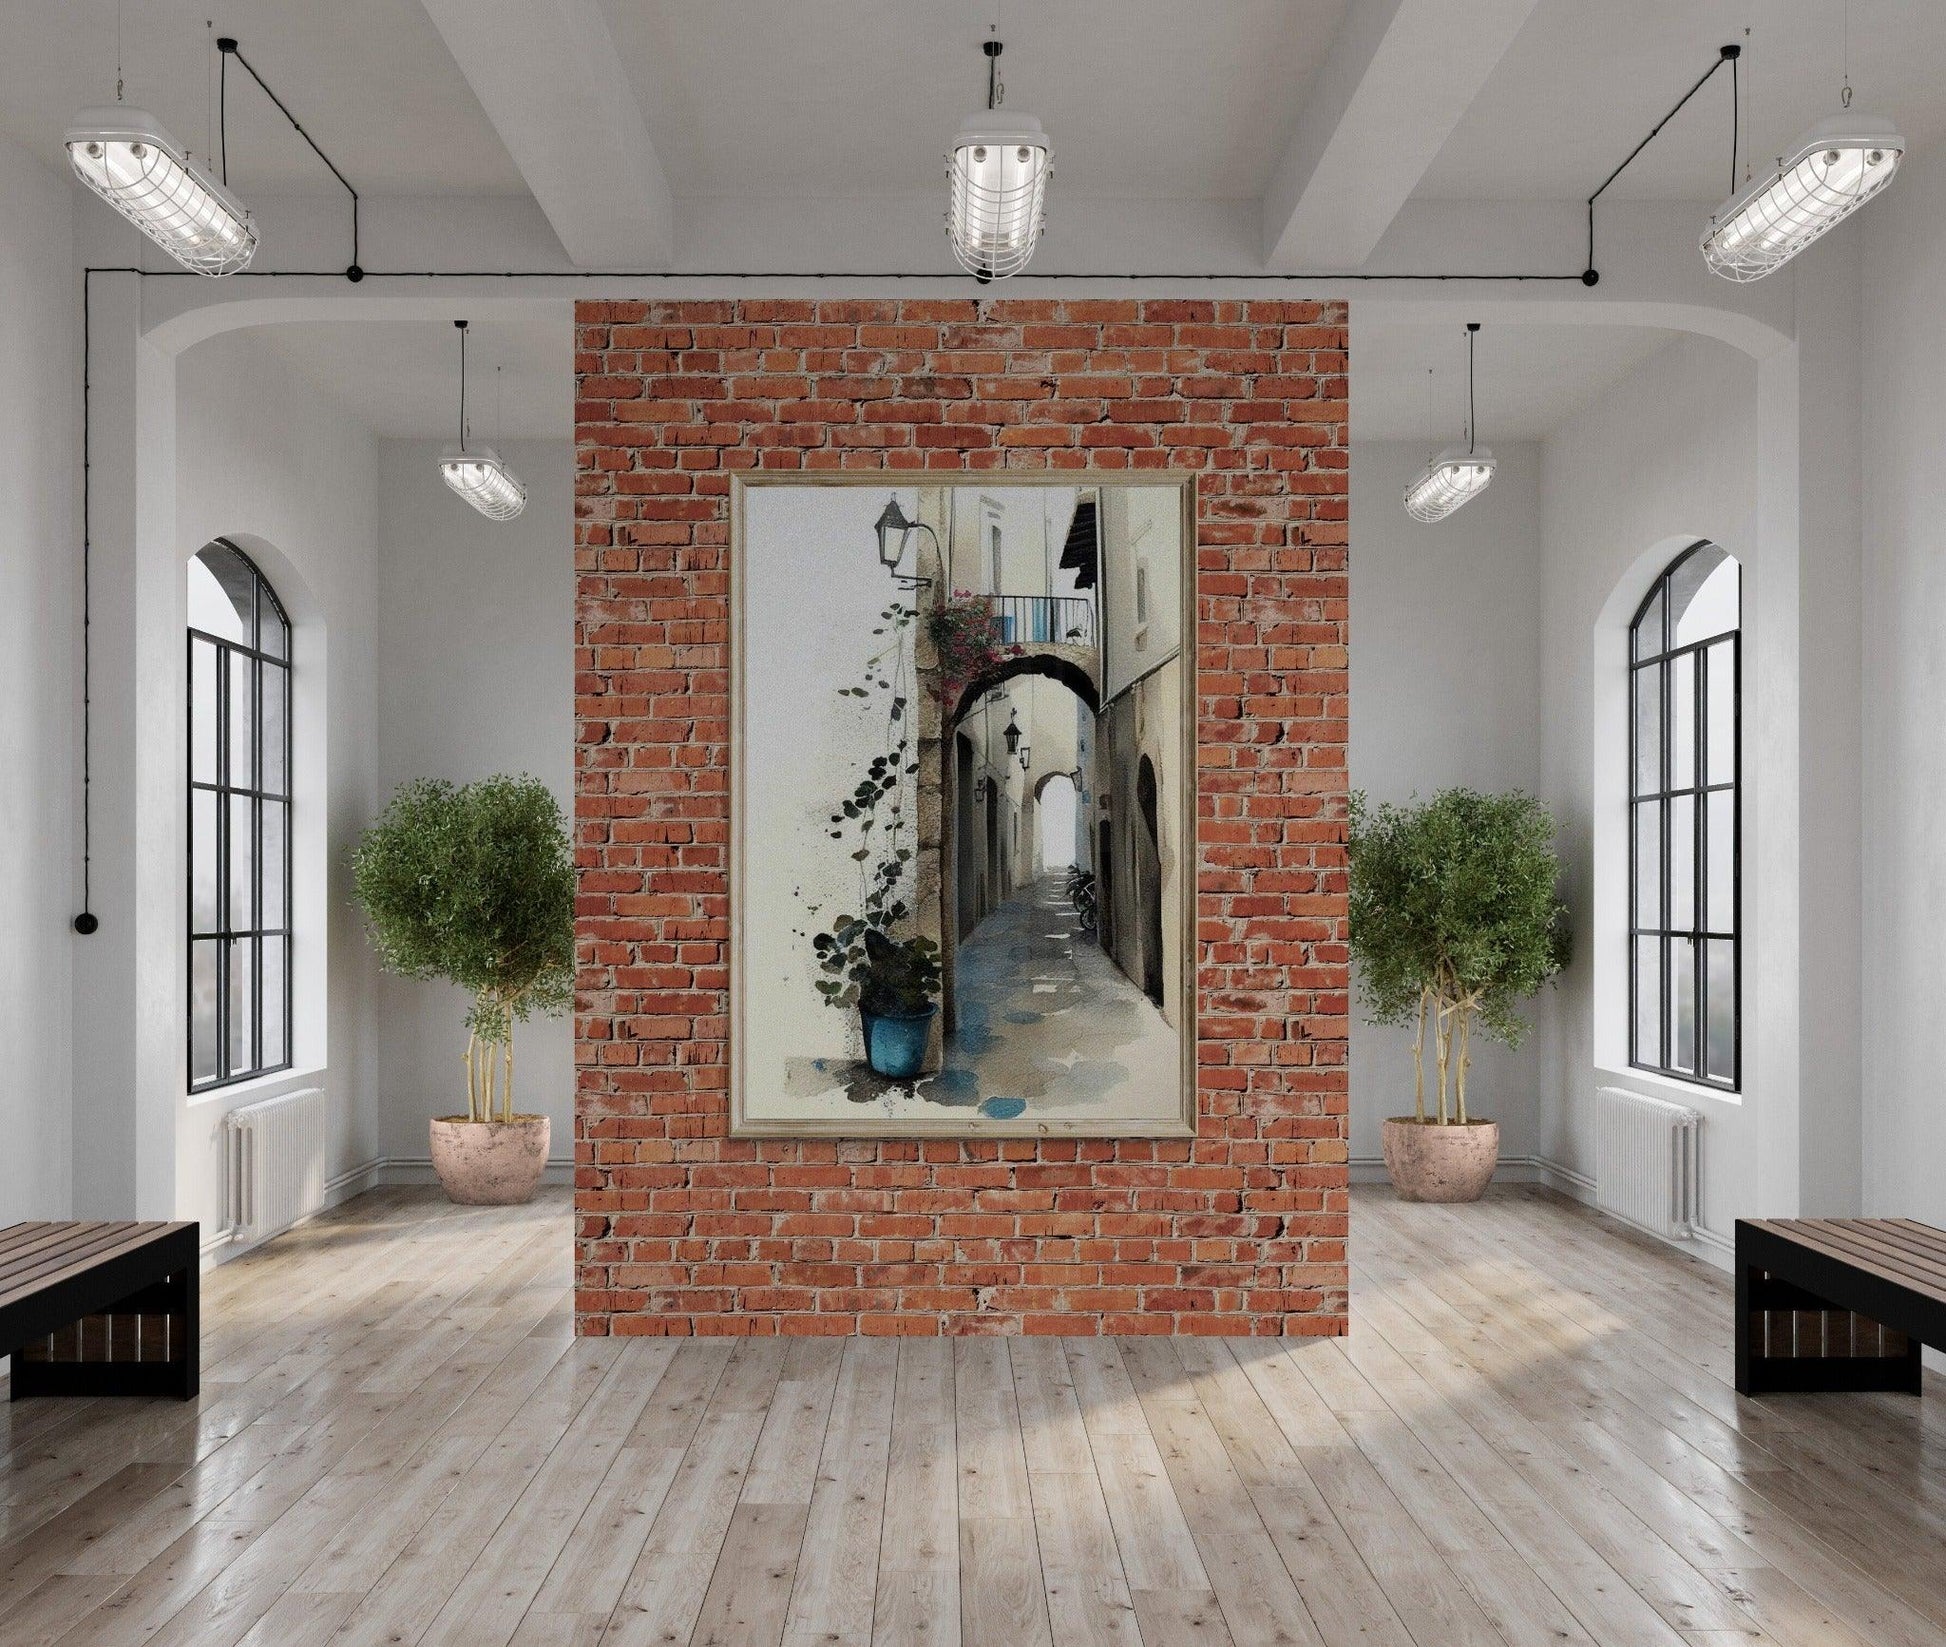 Industrial_style_studio_feature_wall-1a22a7421a25_2